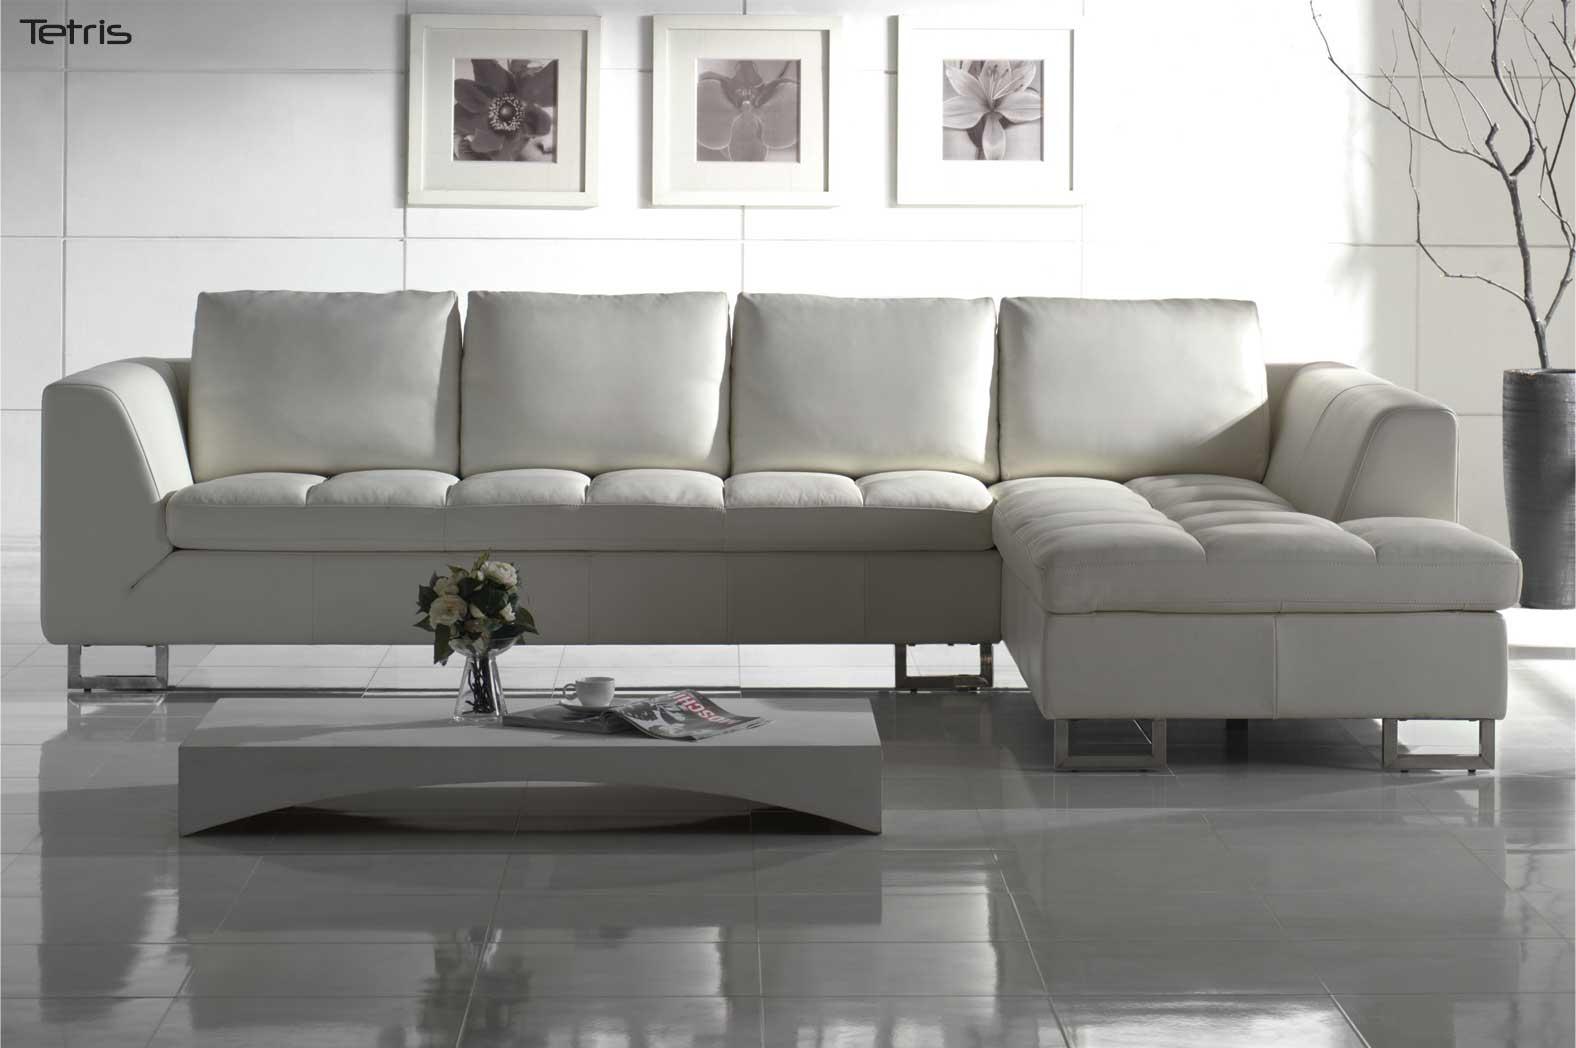 Lovely White Leather Sectional Sofa Furniture Set For Living Room Interior Design With Best Floor Cute Table Design Vase Flower Magazines Glass White Wall And Wall Picture Ideas Furniture + Accessories